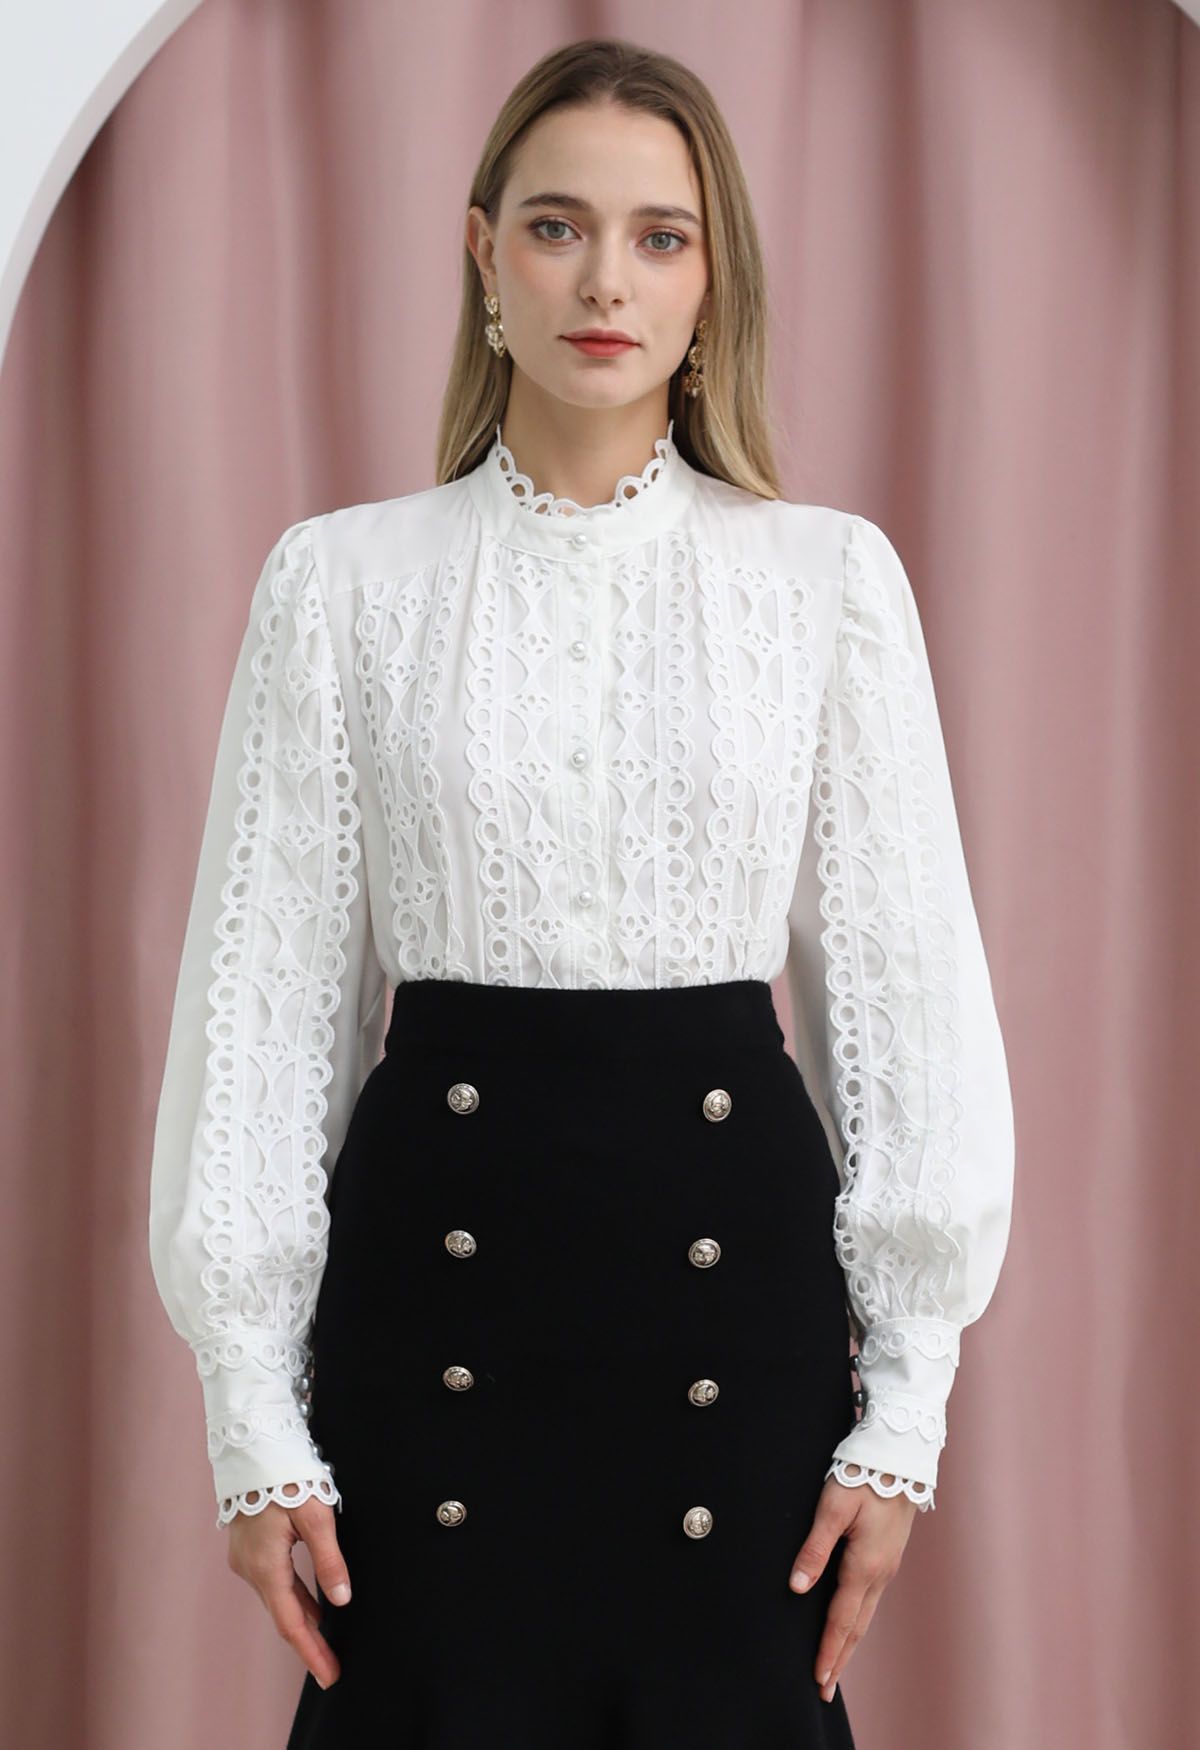 Exquisite Cutwork Bubble Sleeves Button-Up Shirt in White | Chicwish